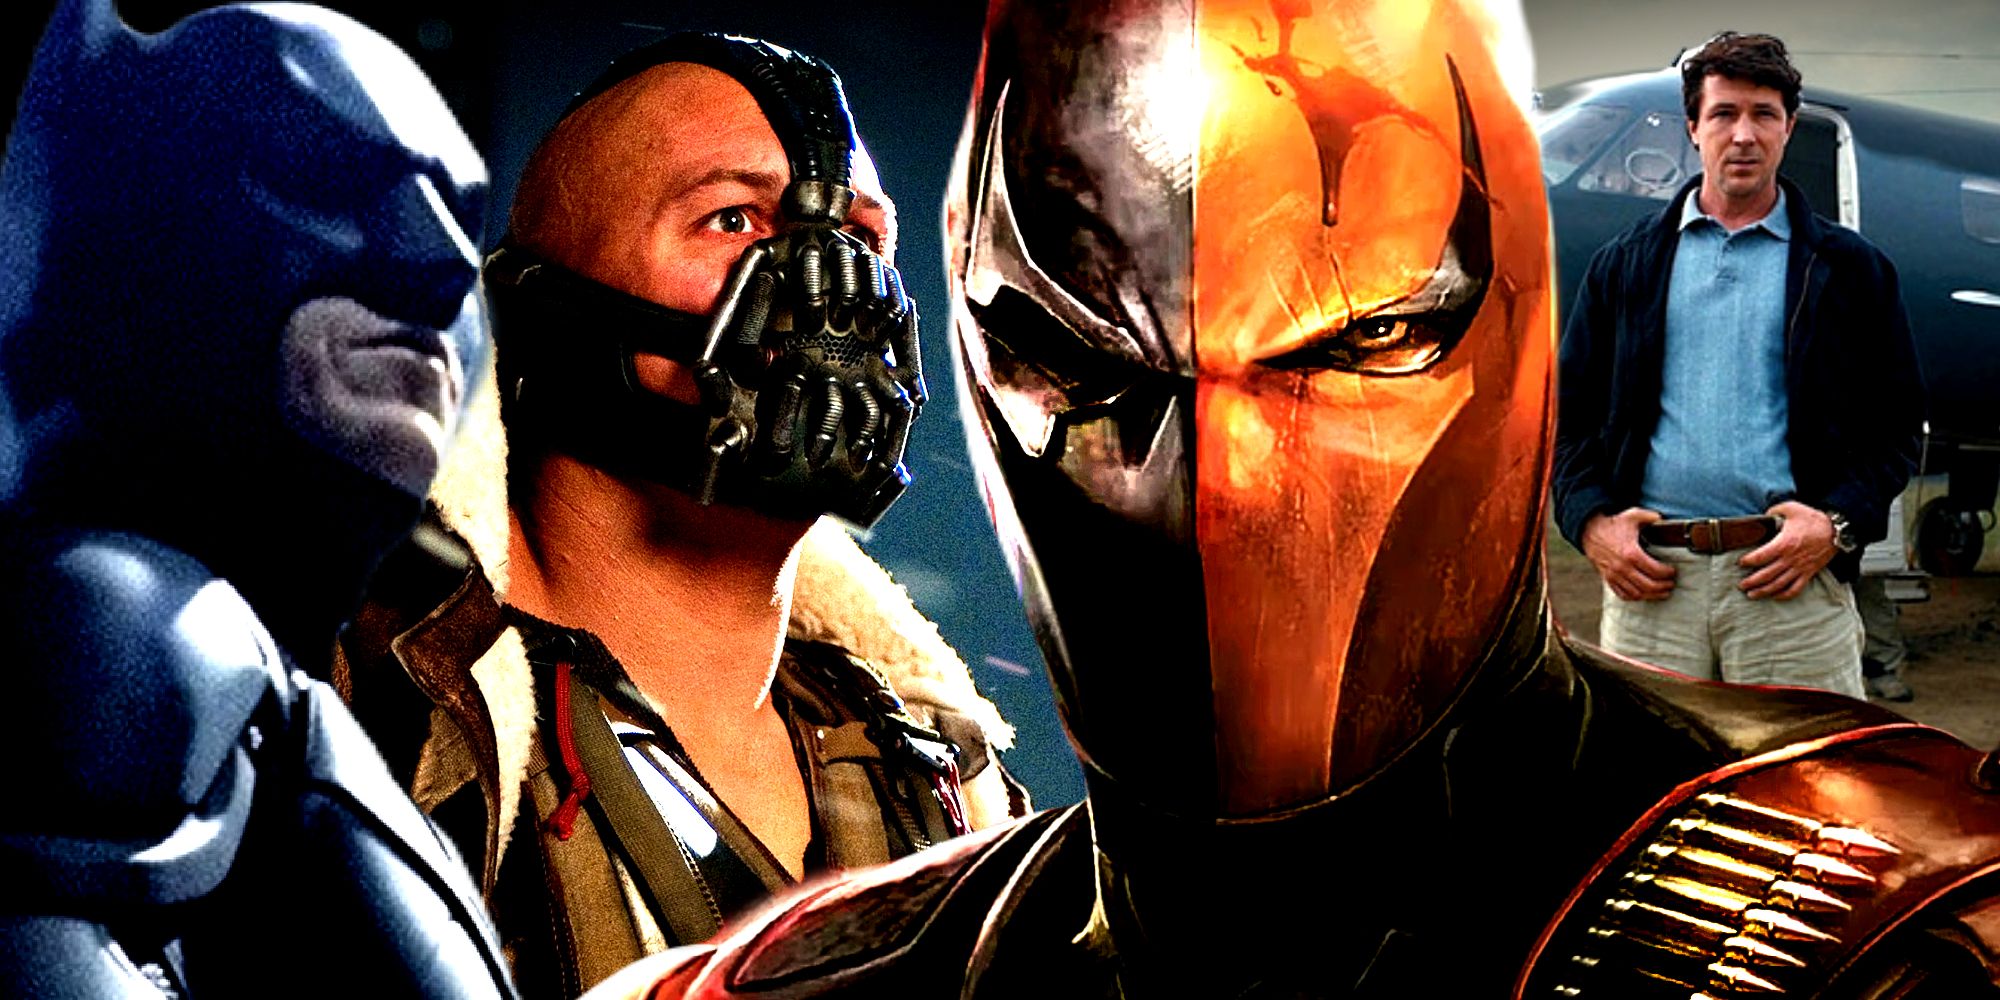 Deathstroke Faces Batman and Bane next to CIA Agent Bill Wilson in The Dark Knight Rises